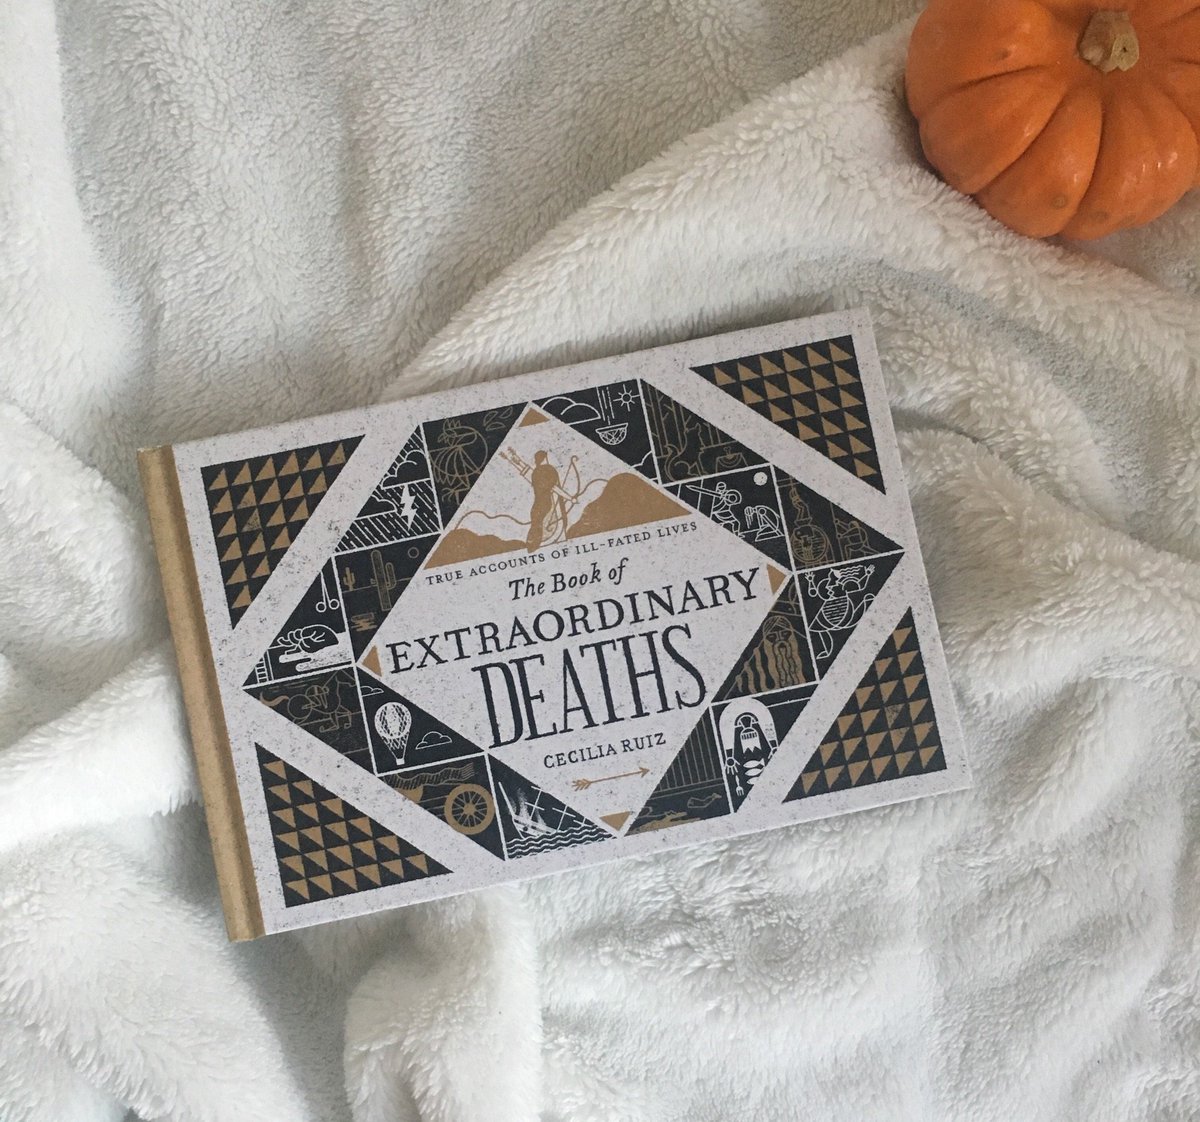 Looking for a dose of dark humor paired with some seriously gorgeous art? @cecifonik’s THE BOOK OF EXTRAORDINARY DEATHS is on shelves today! bit.ly/2uBeiwp